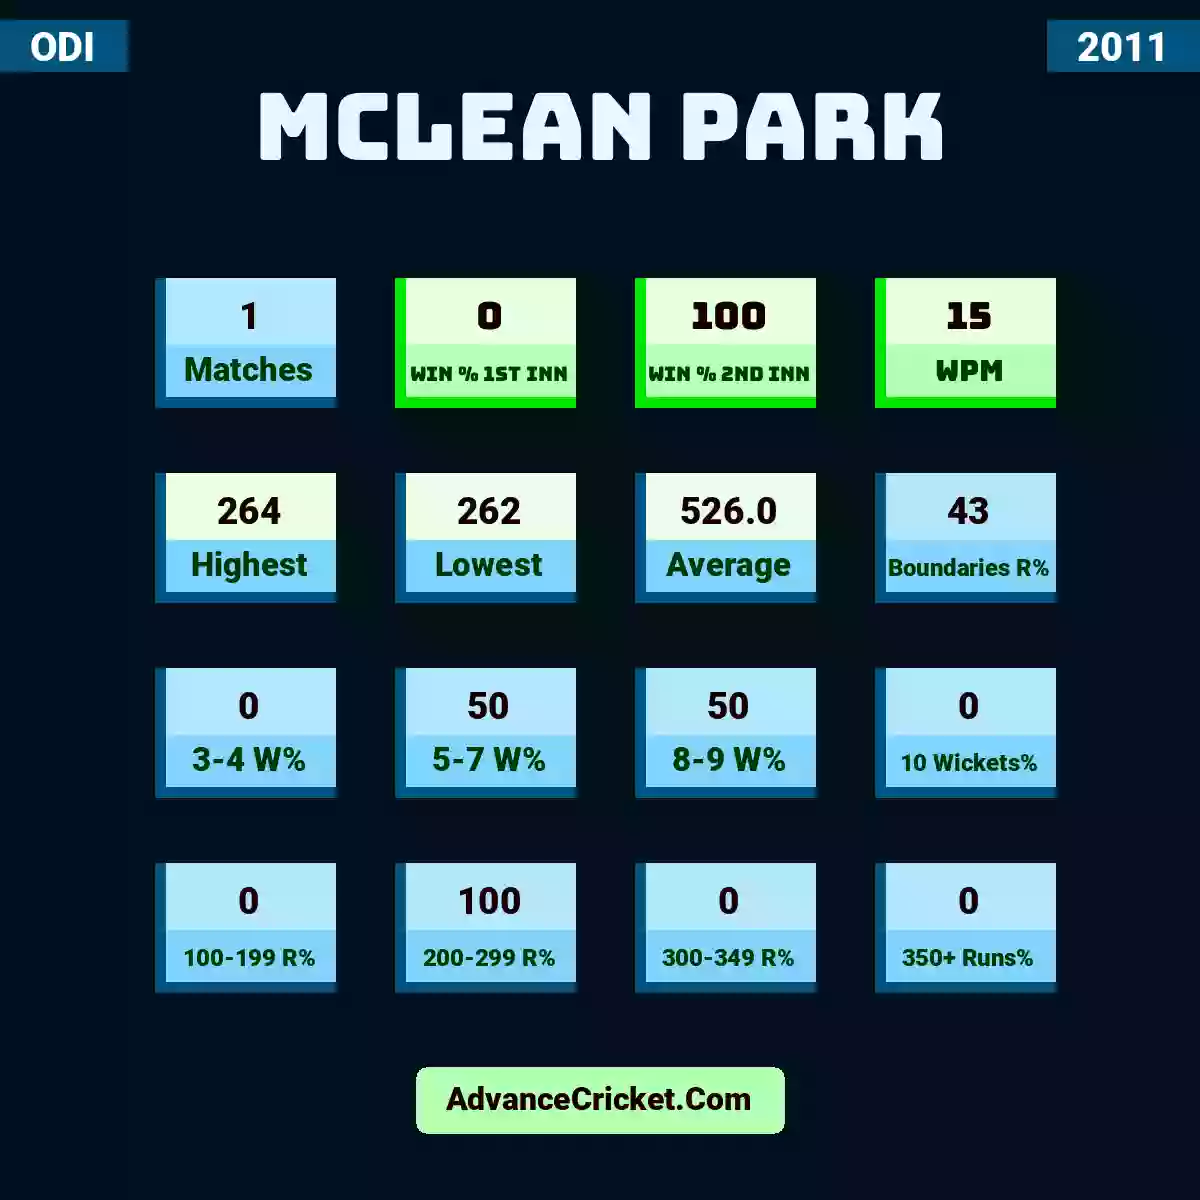 Image showing McLean Park with Matches: 1, Win % 1st Inn: 0, Win % 2nd Inn: 100, WPM: 15, Highest: 264, Lowest: 262, Average: 526.0, Boundaries R%: 43, 3-4 W%: 0, 5-7 W%: 50, 8-9 W%: 50, 10 Wickets%: 0, 100-199 R%: 0, 200-299 R%: 100, 300-349 R%: 0, 350+ Runs%: 0.